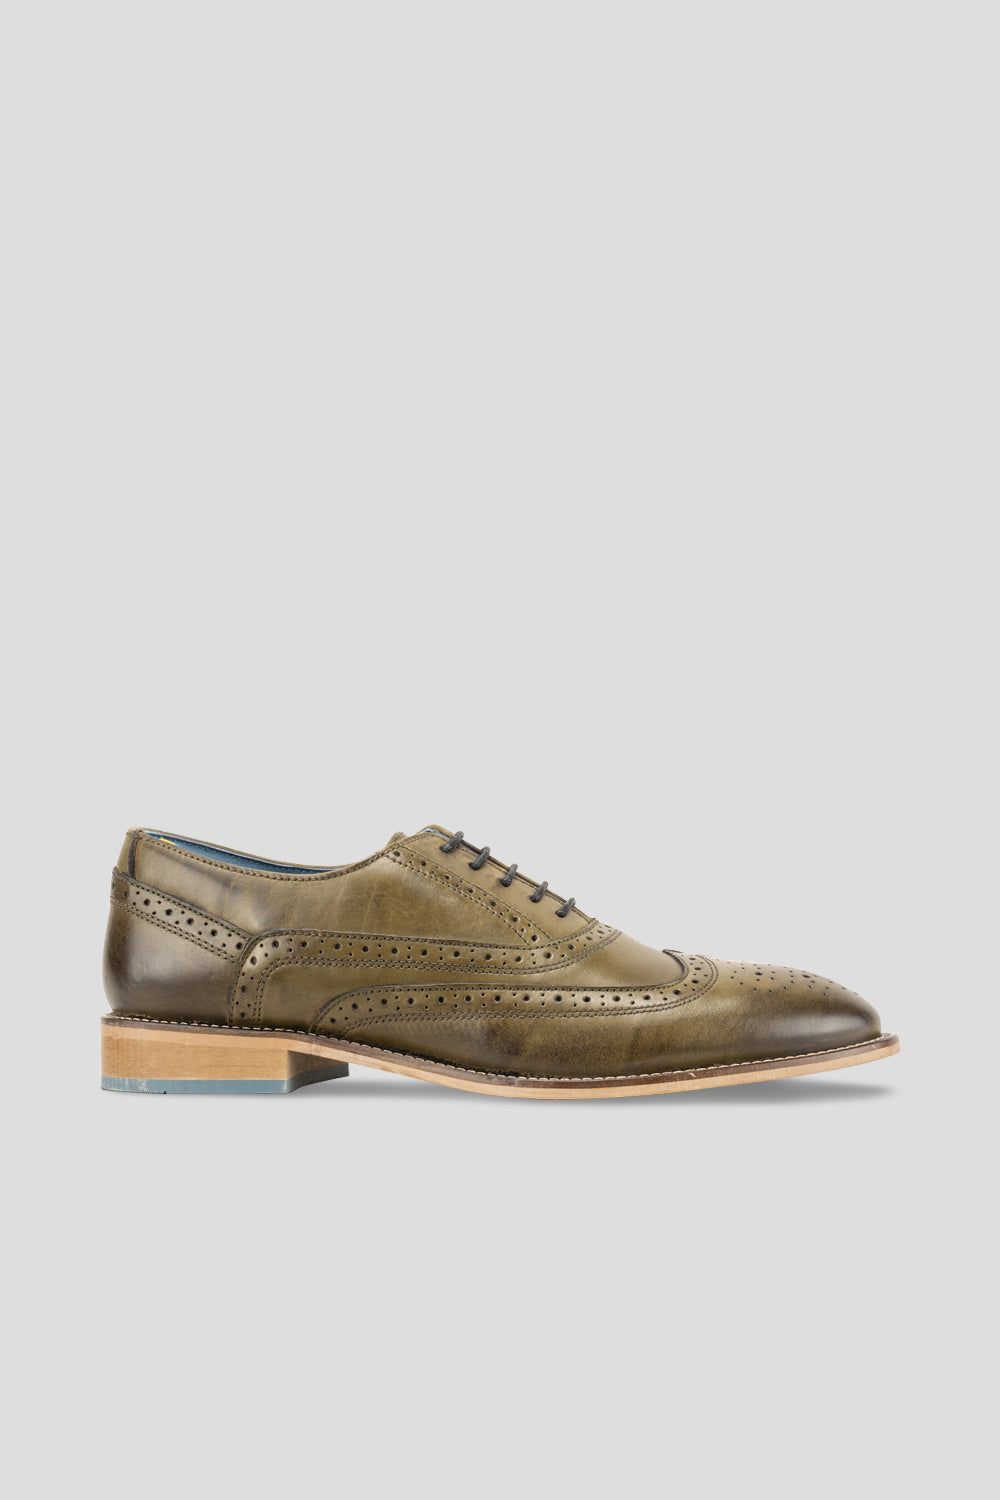 Winston Green Brogue Oxford Leather Shoes